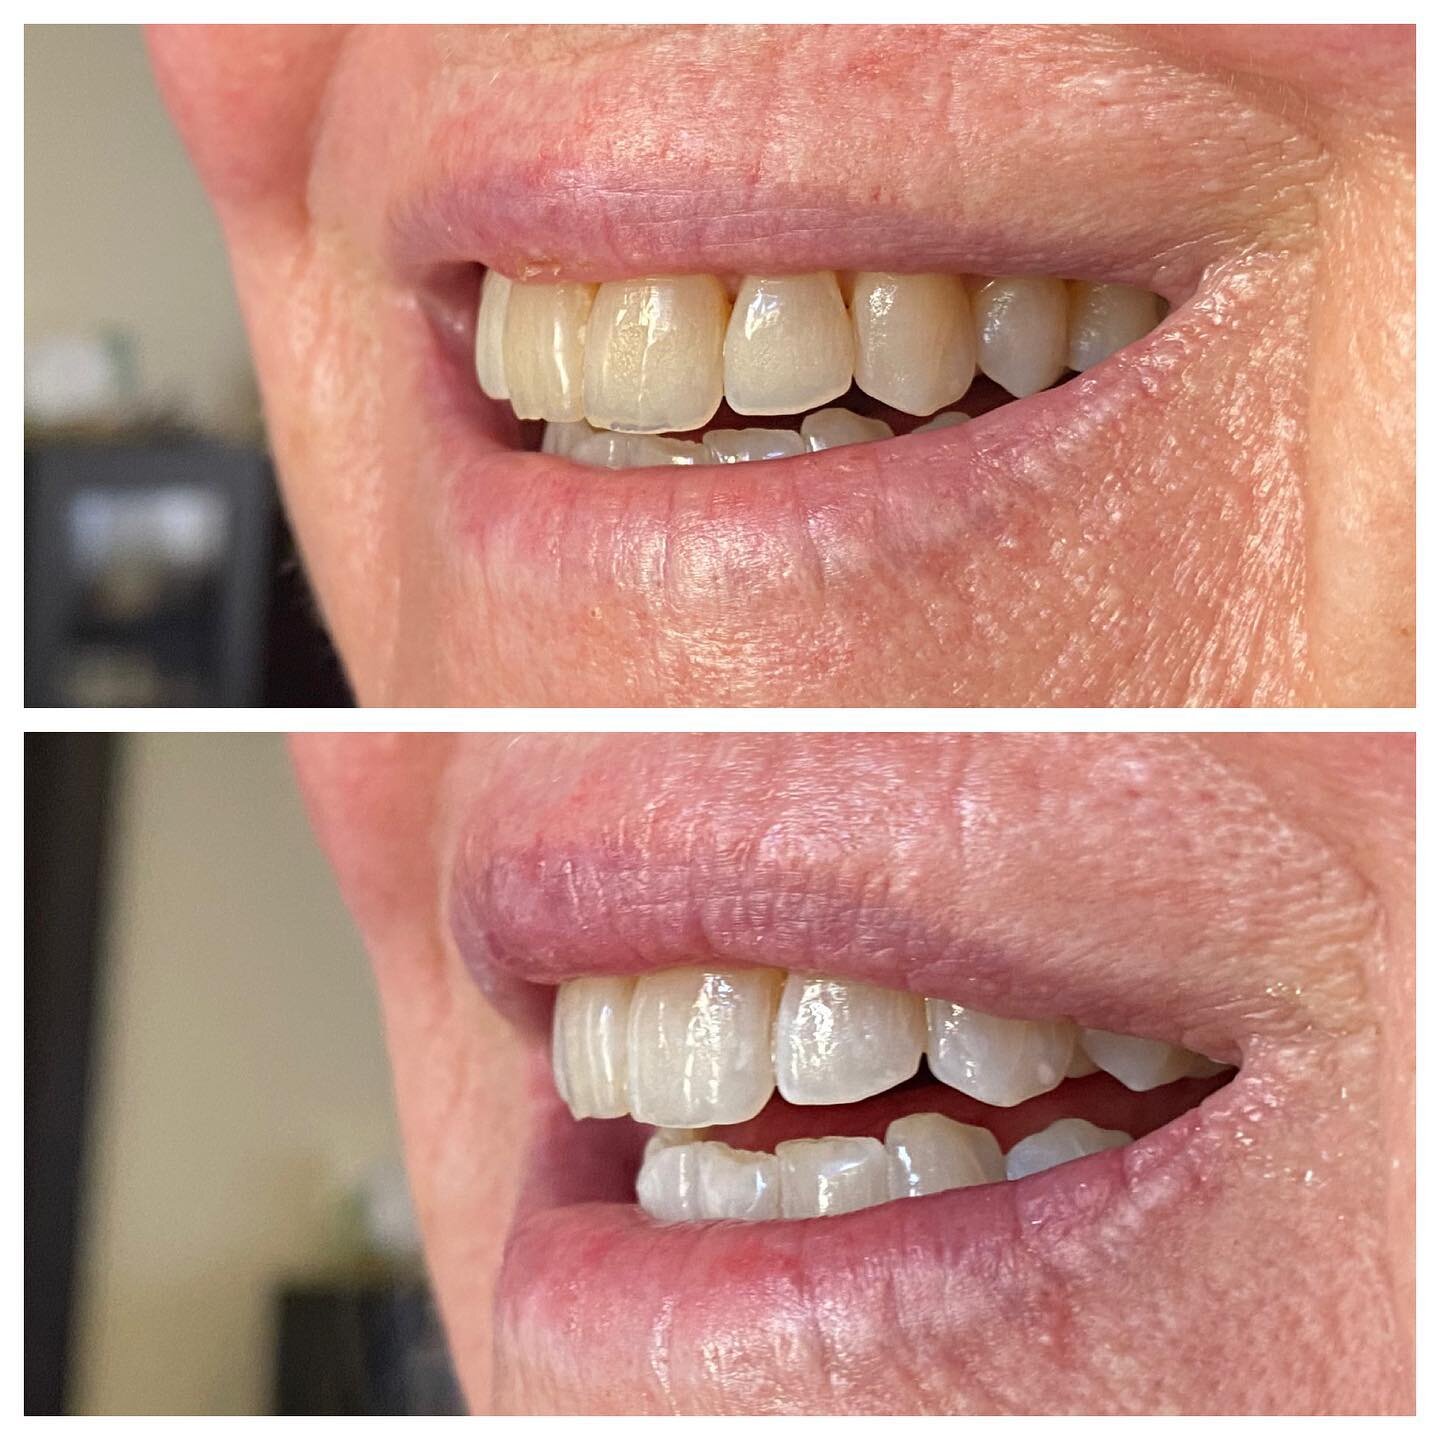 One session and already a world of difference! 
.
.
.
.
#teethwhitening #skincare #beauty #sancarlos #estylife #esty #brightsmile